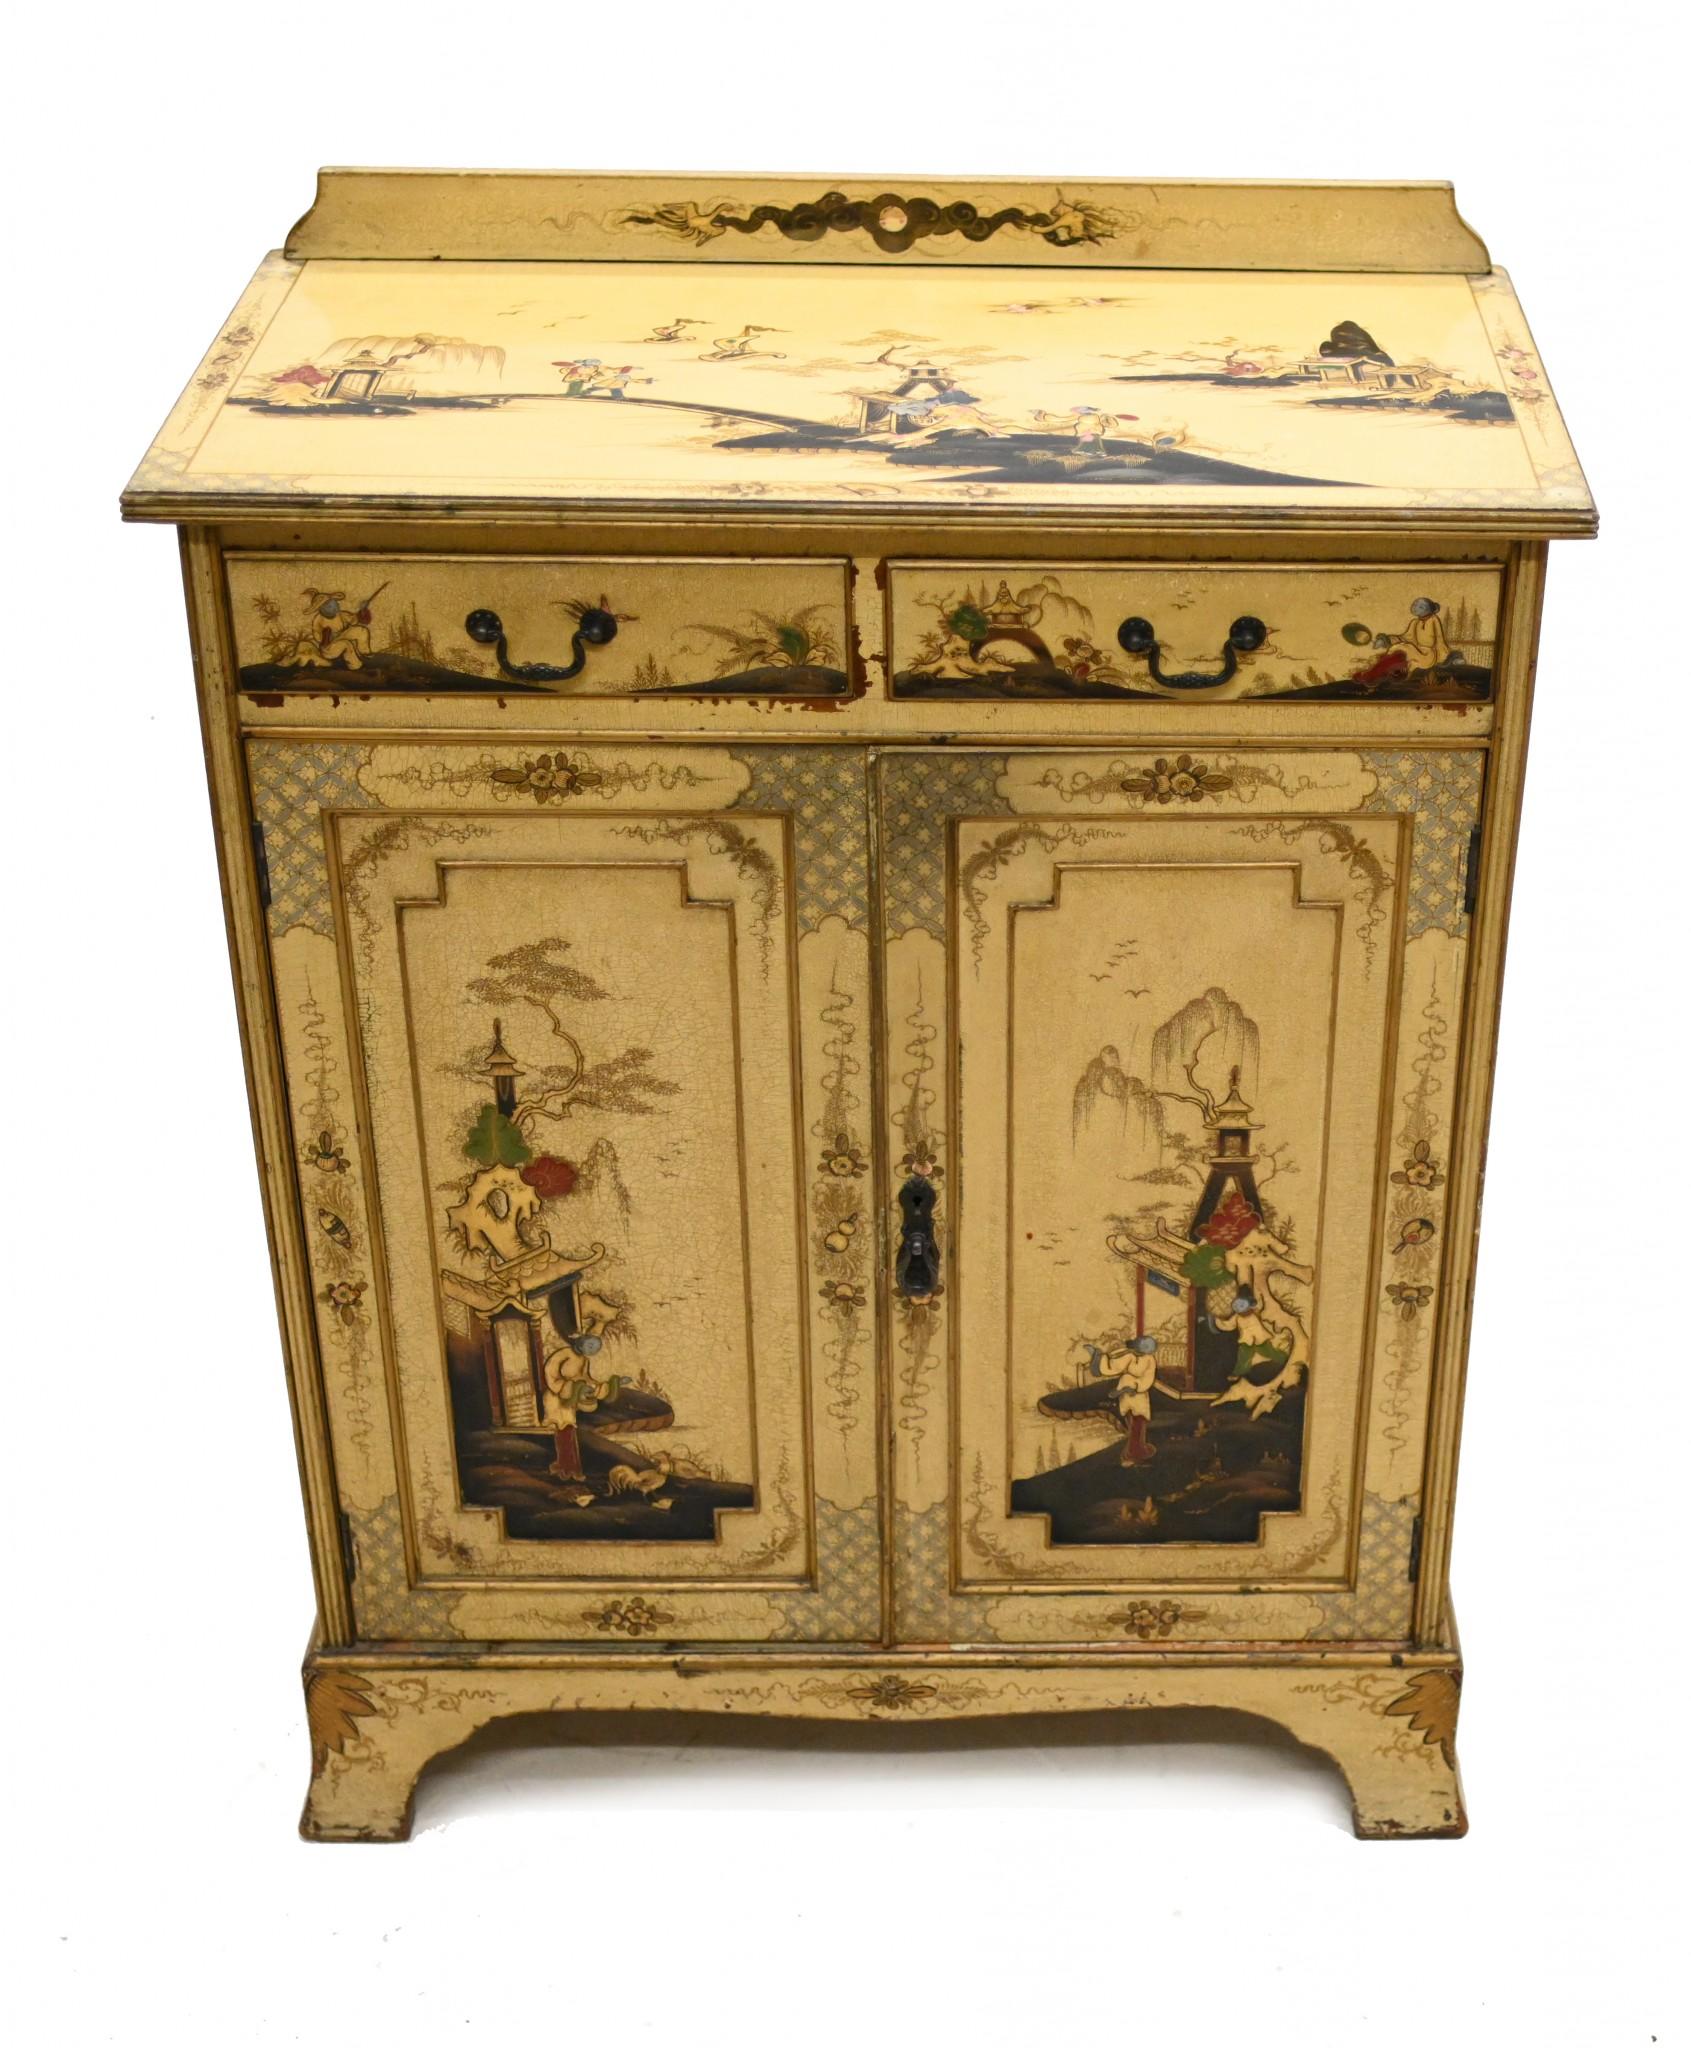 Glorious antique lacquered side cabinet in the Chinese manner with intricate Chinoiserie
Off white cream colour with craquelure and antiqued finish
Craquelure on a painting is the network, or pattern, of cracks that develops across the surface as